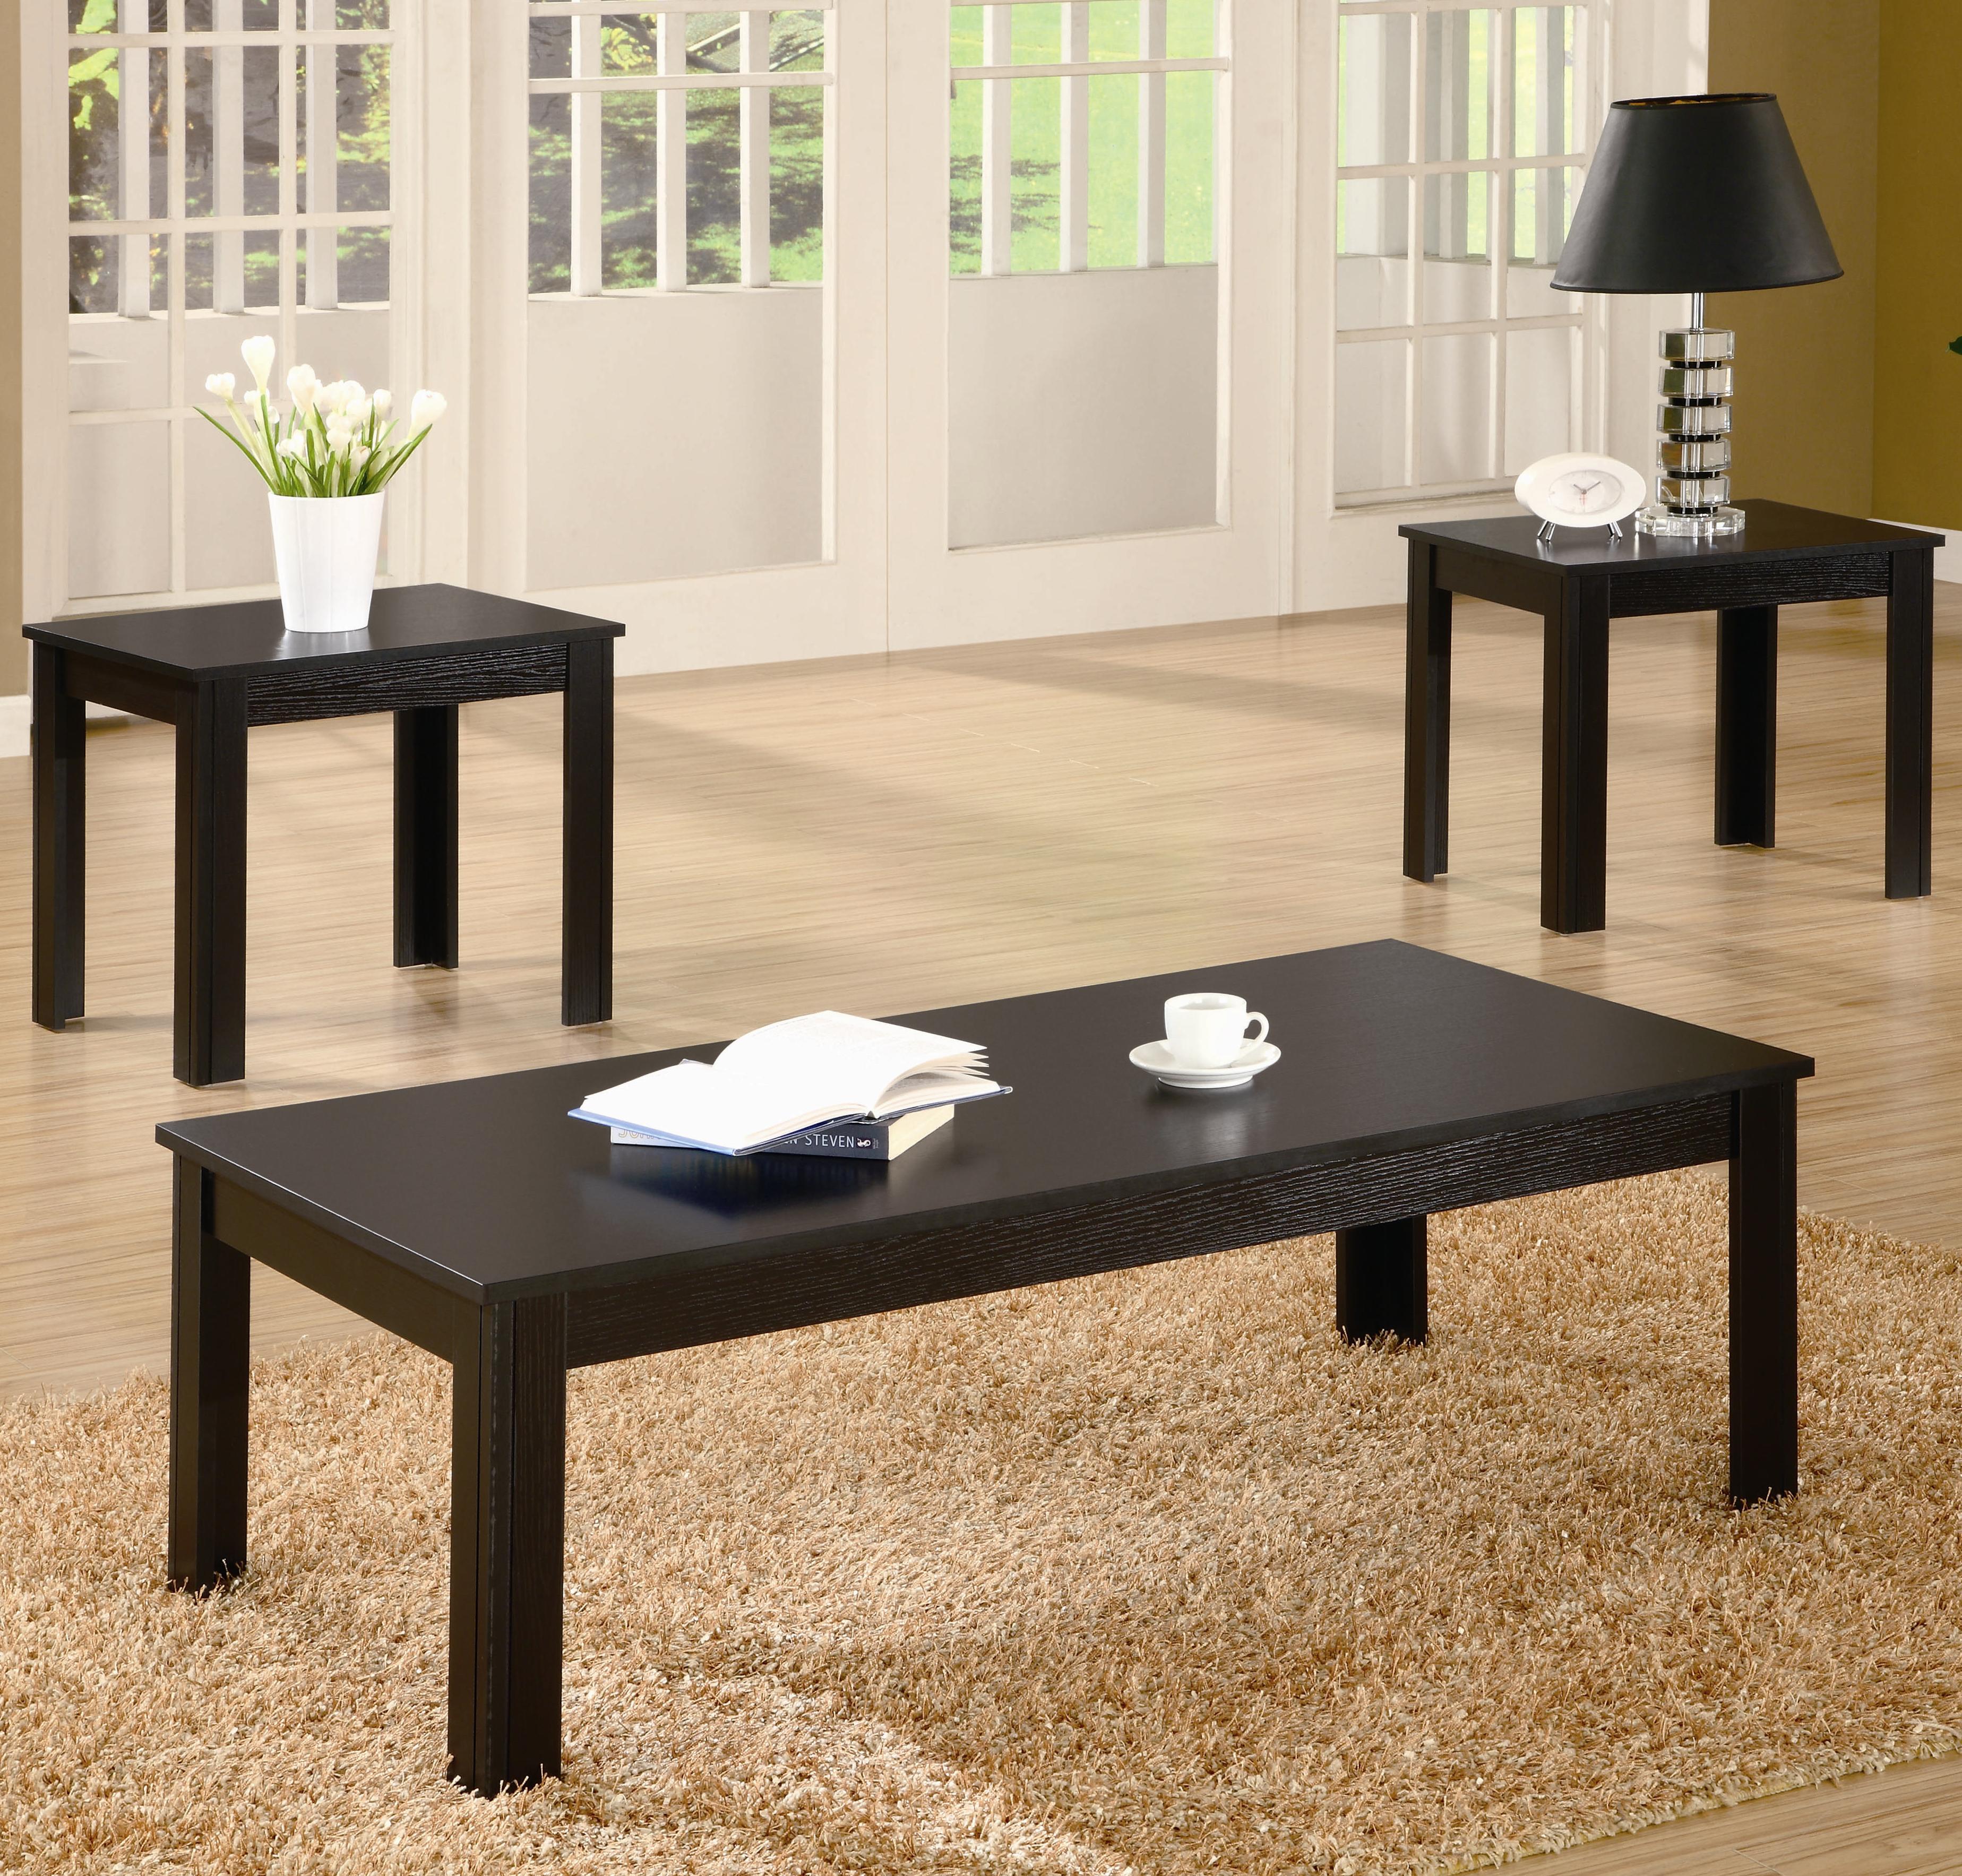 coffee tables ideas spectacular black and end table set windows sample themes amazing all accreditation trendy pulaski furniture oval glass side lexington girls bedroom brown